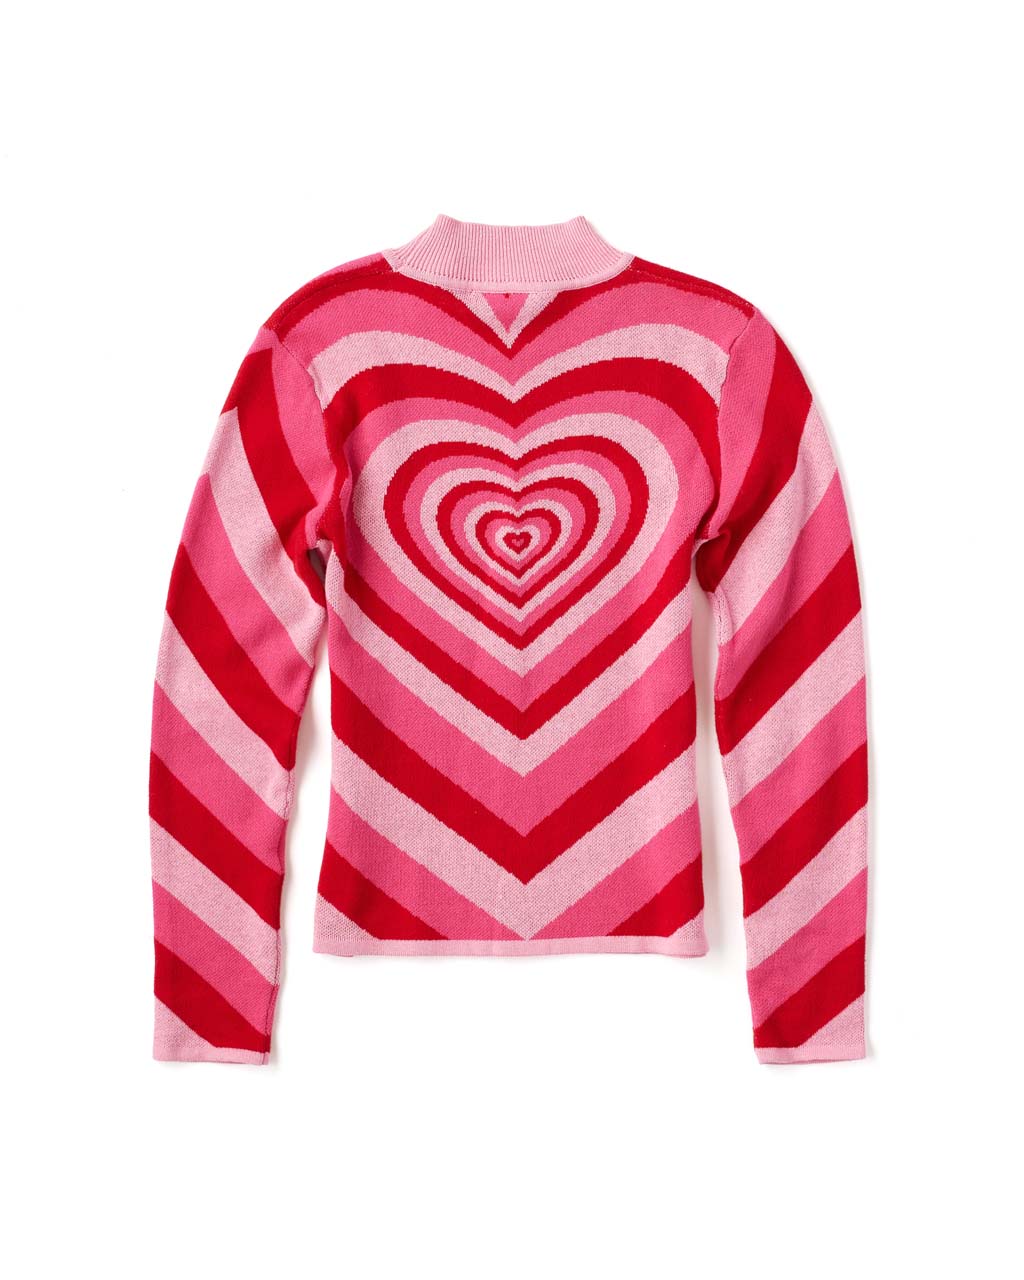 All My Heart Sweater by lazy oaf - sweater - ban.do